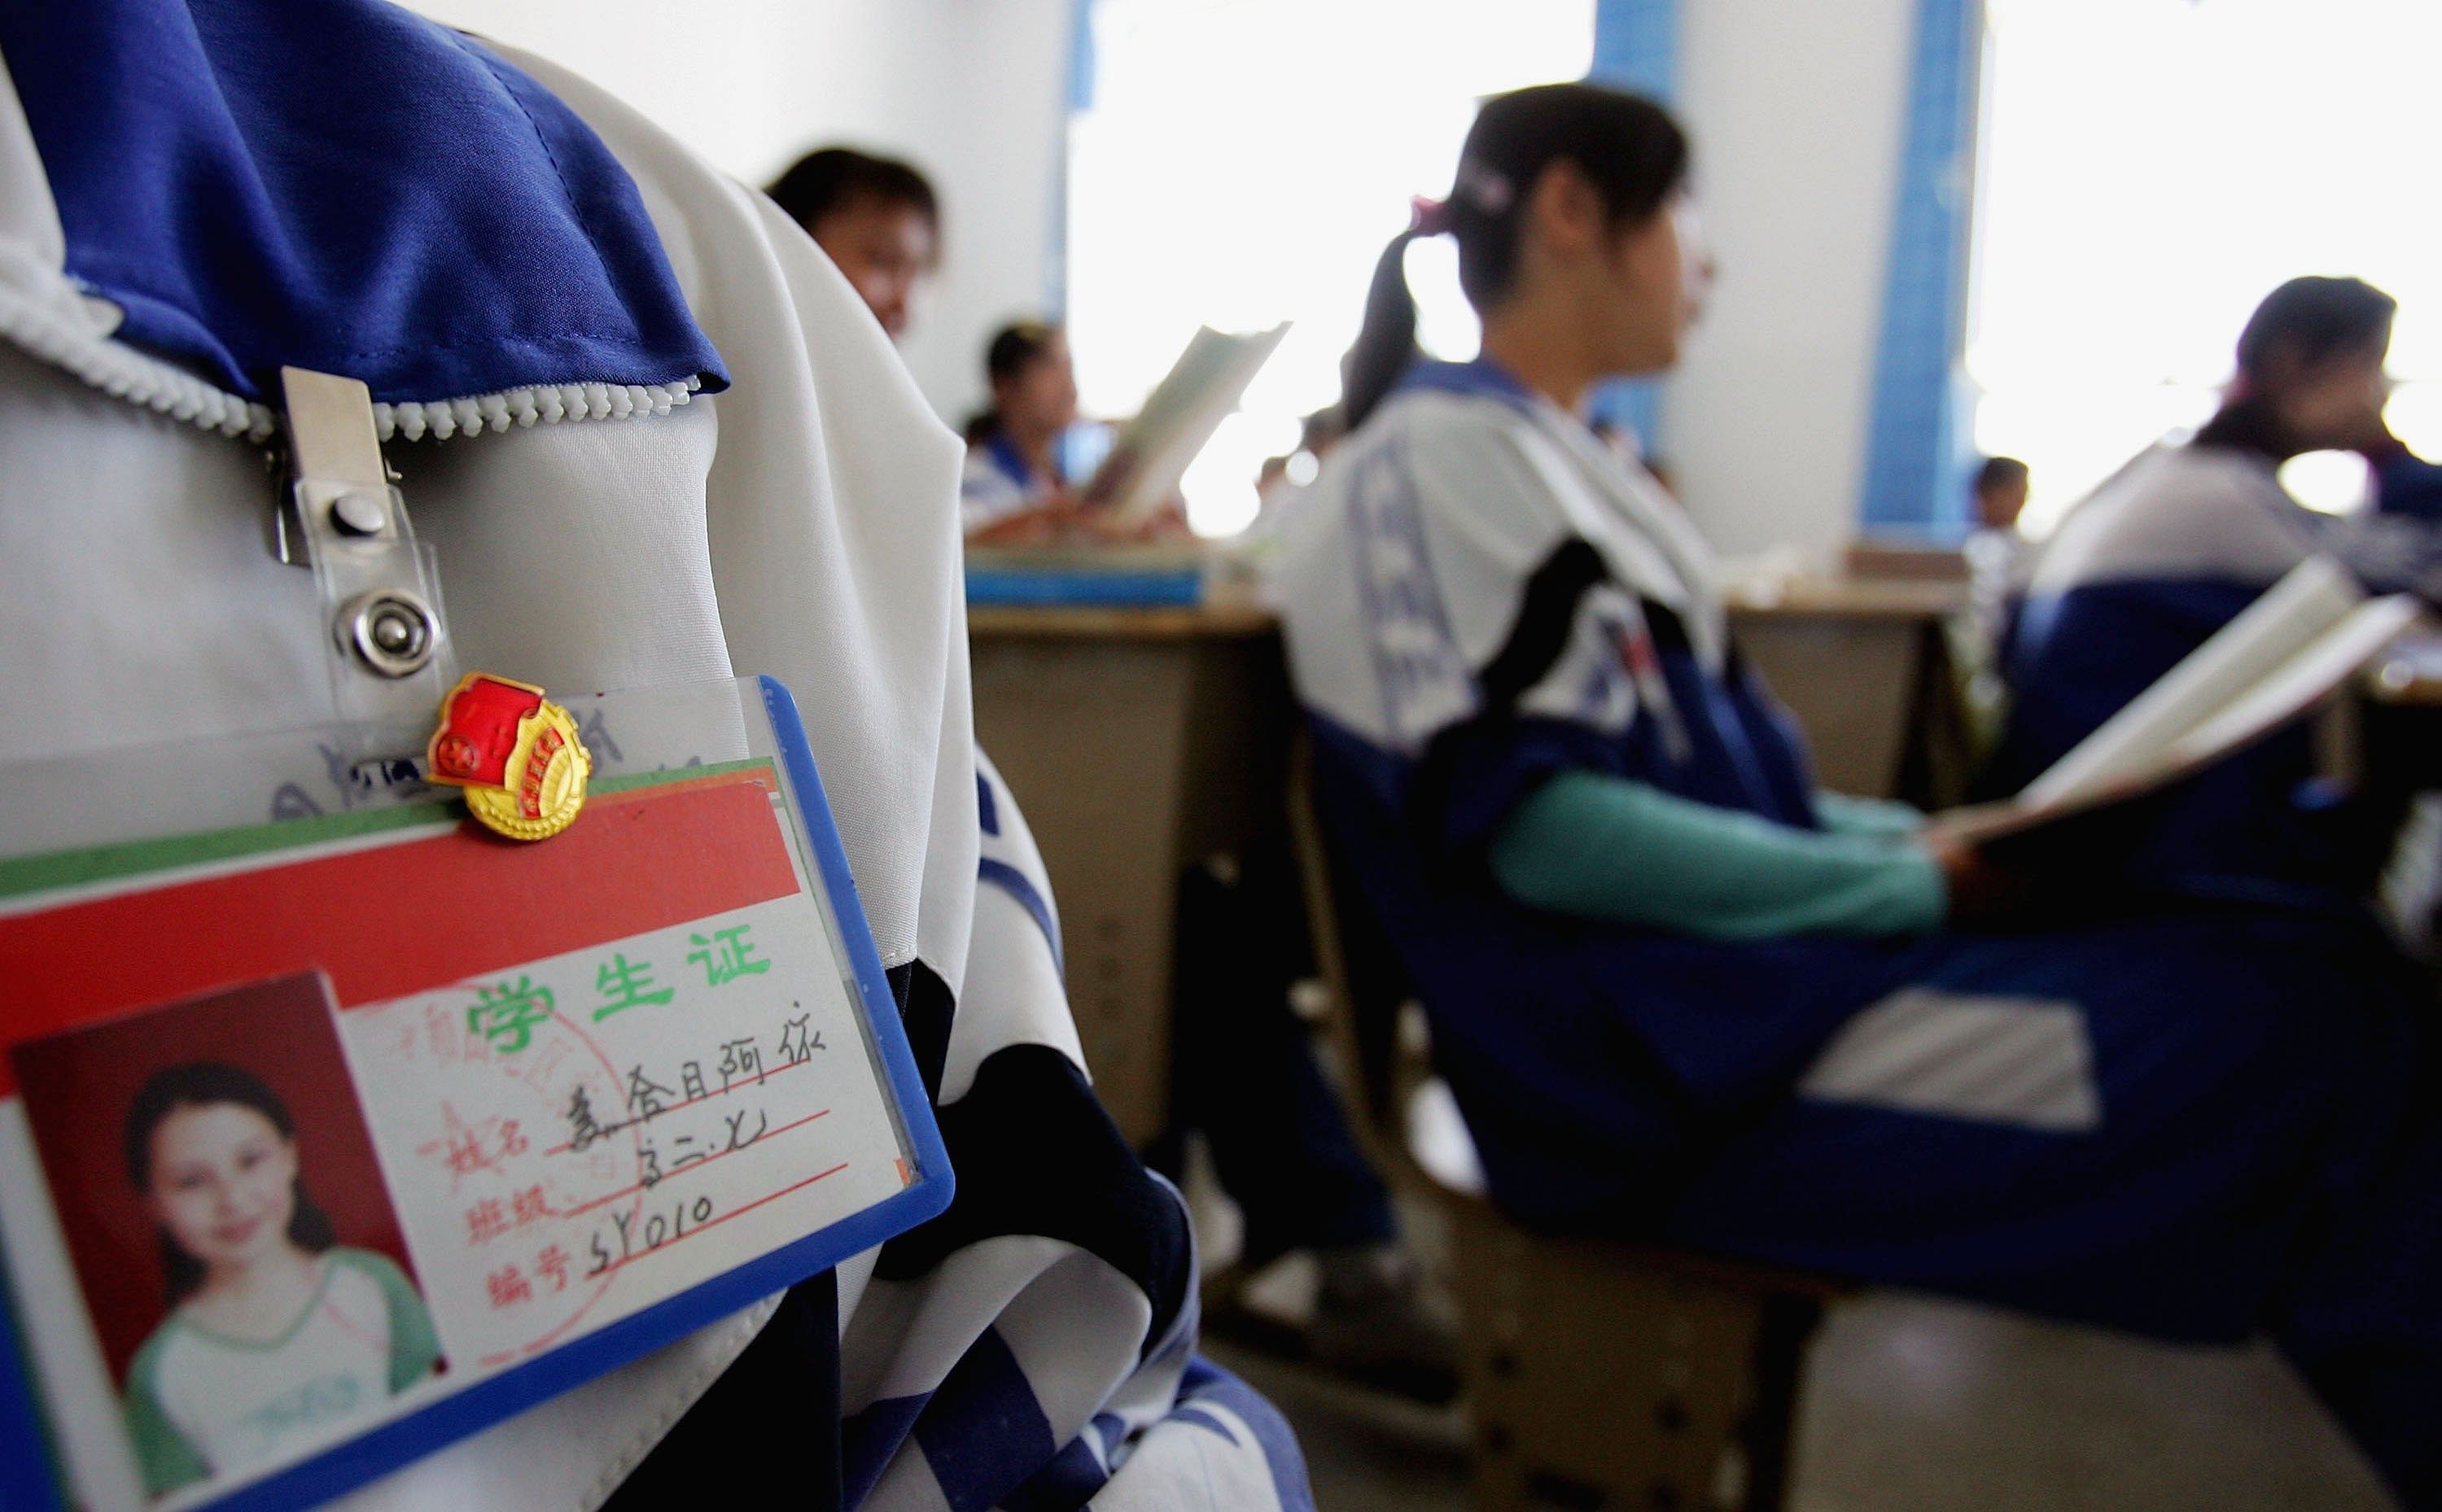 The World Bank launched another review of the program in late August after Foreign Policy magazine reported that a school that benefited from a tranche of the $50 million loan to China bought "barbed wire, gas launchers, and body armor." Photo/Getty